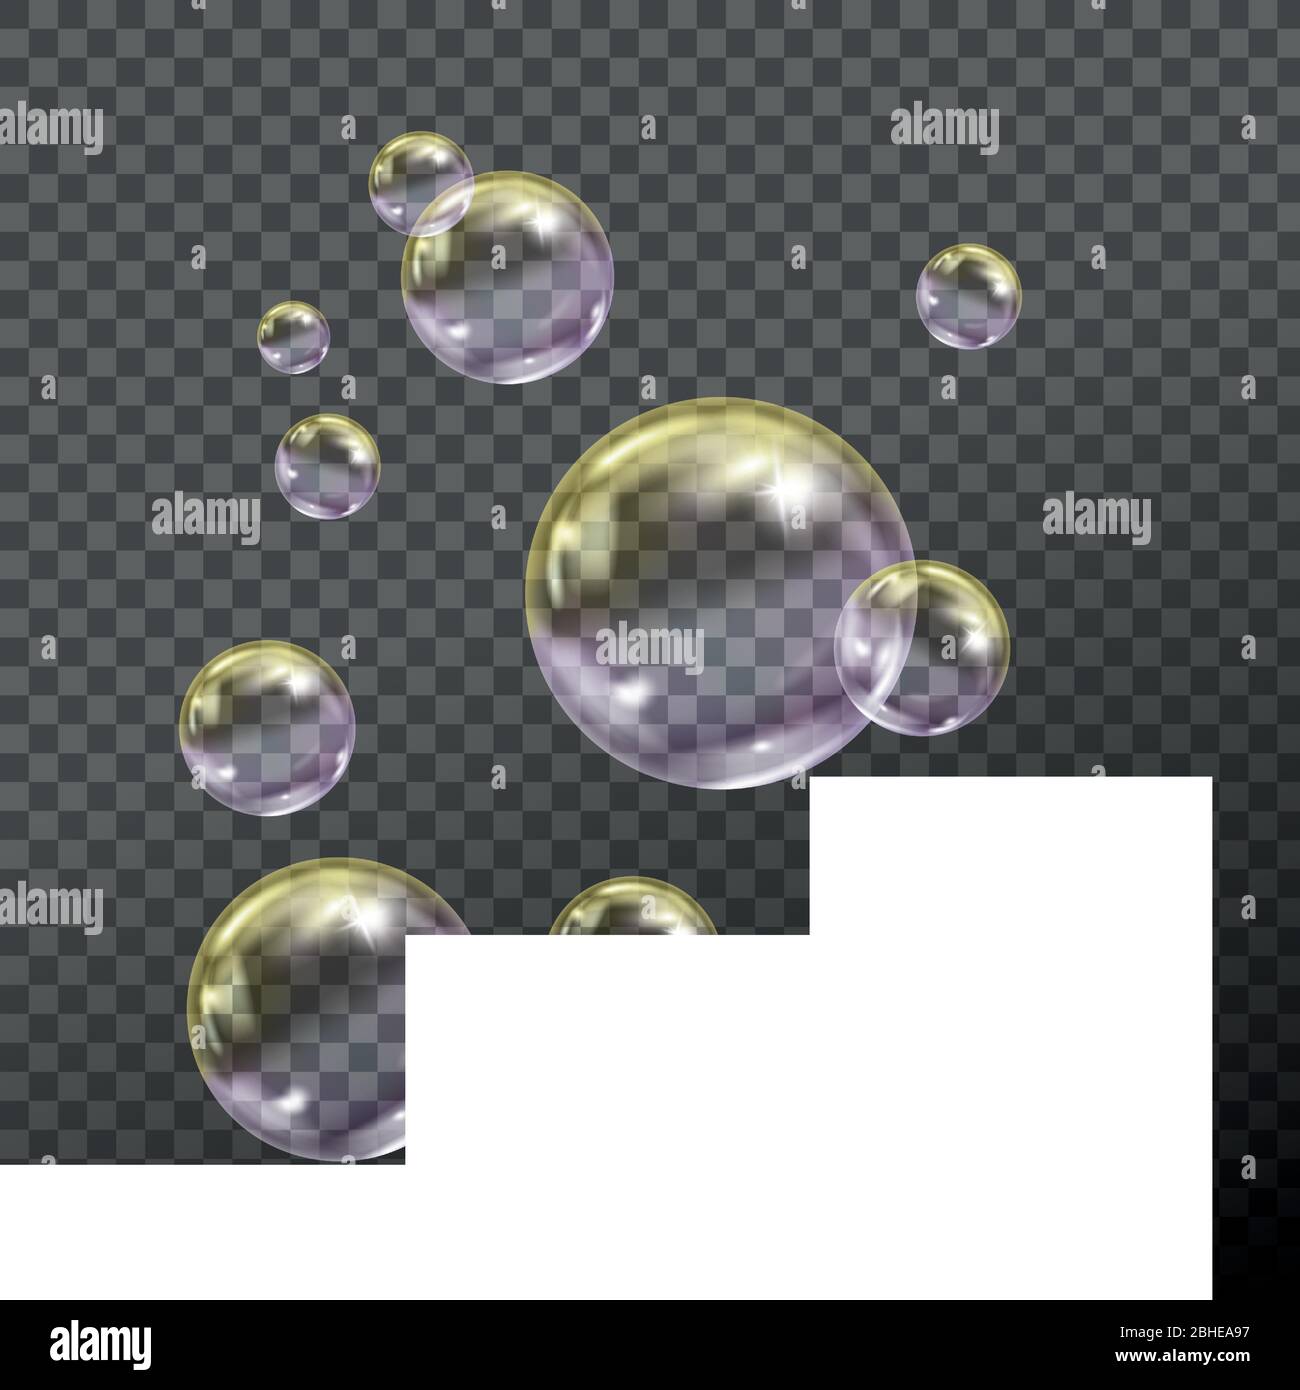 Flying transparent soap bubbles on checkered background. Stock Vector